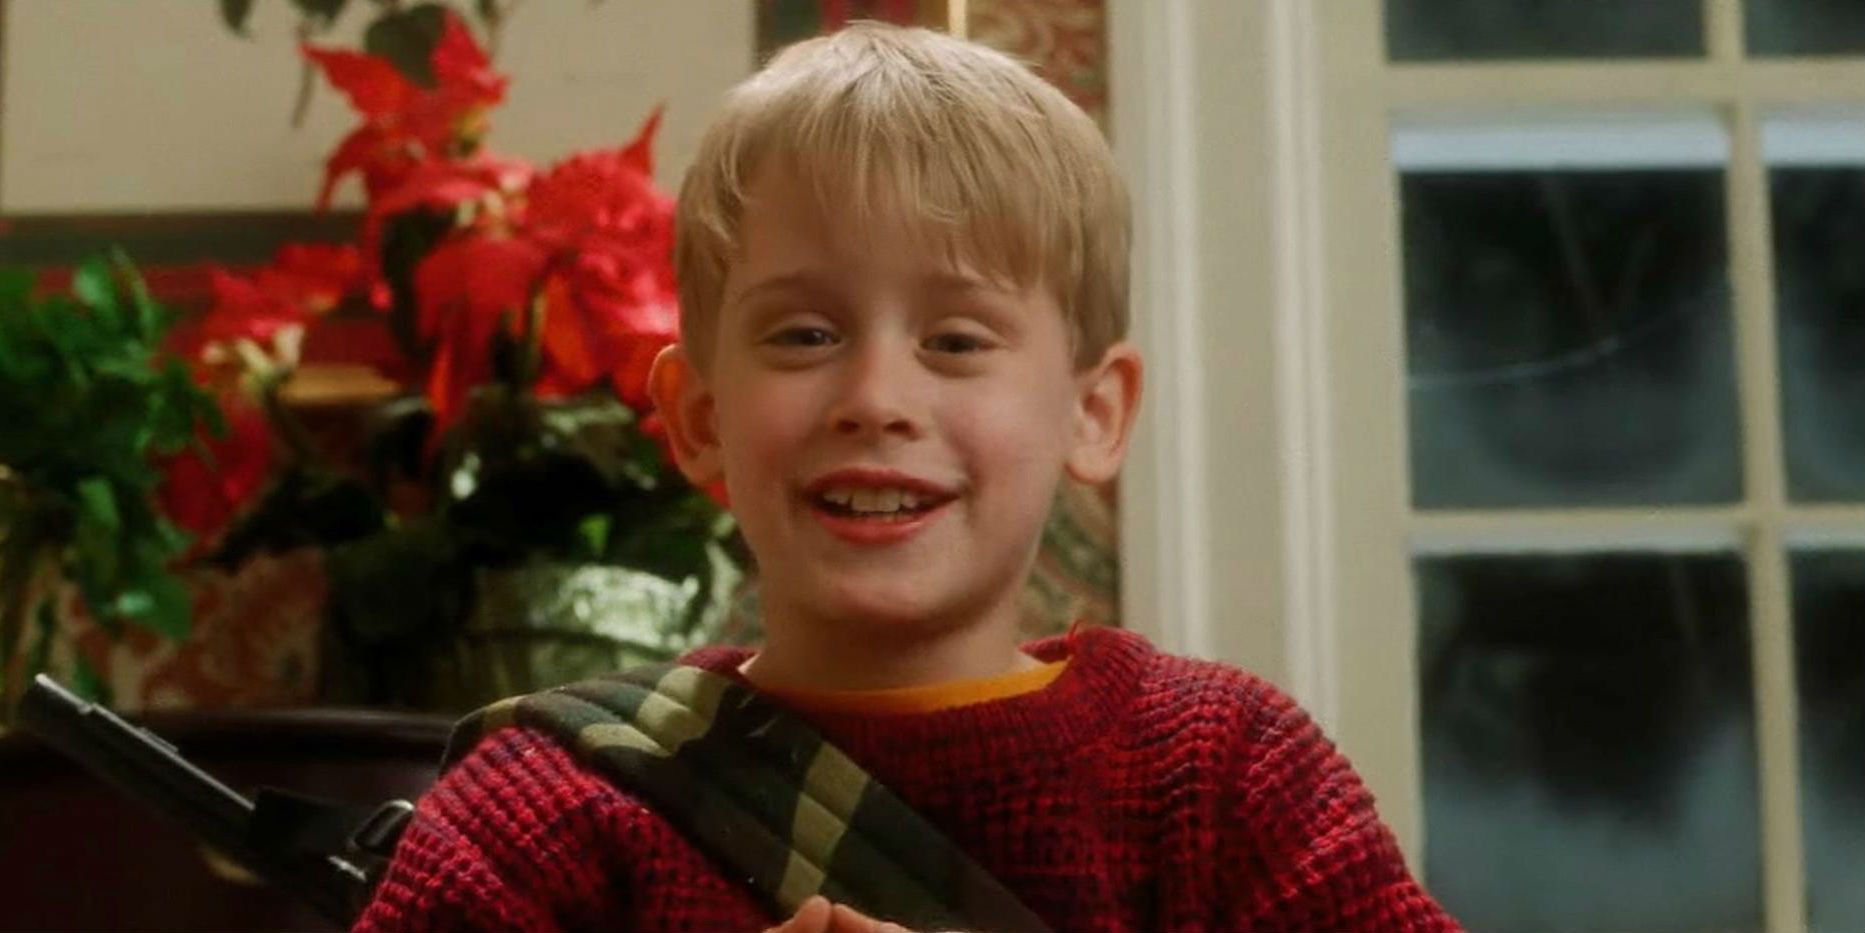 Home Alone Reboot To Air on Disney+ With Ellie Kemper and Rob Delaney